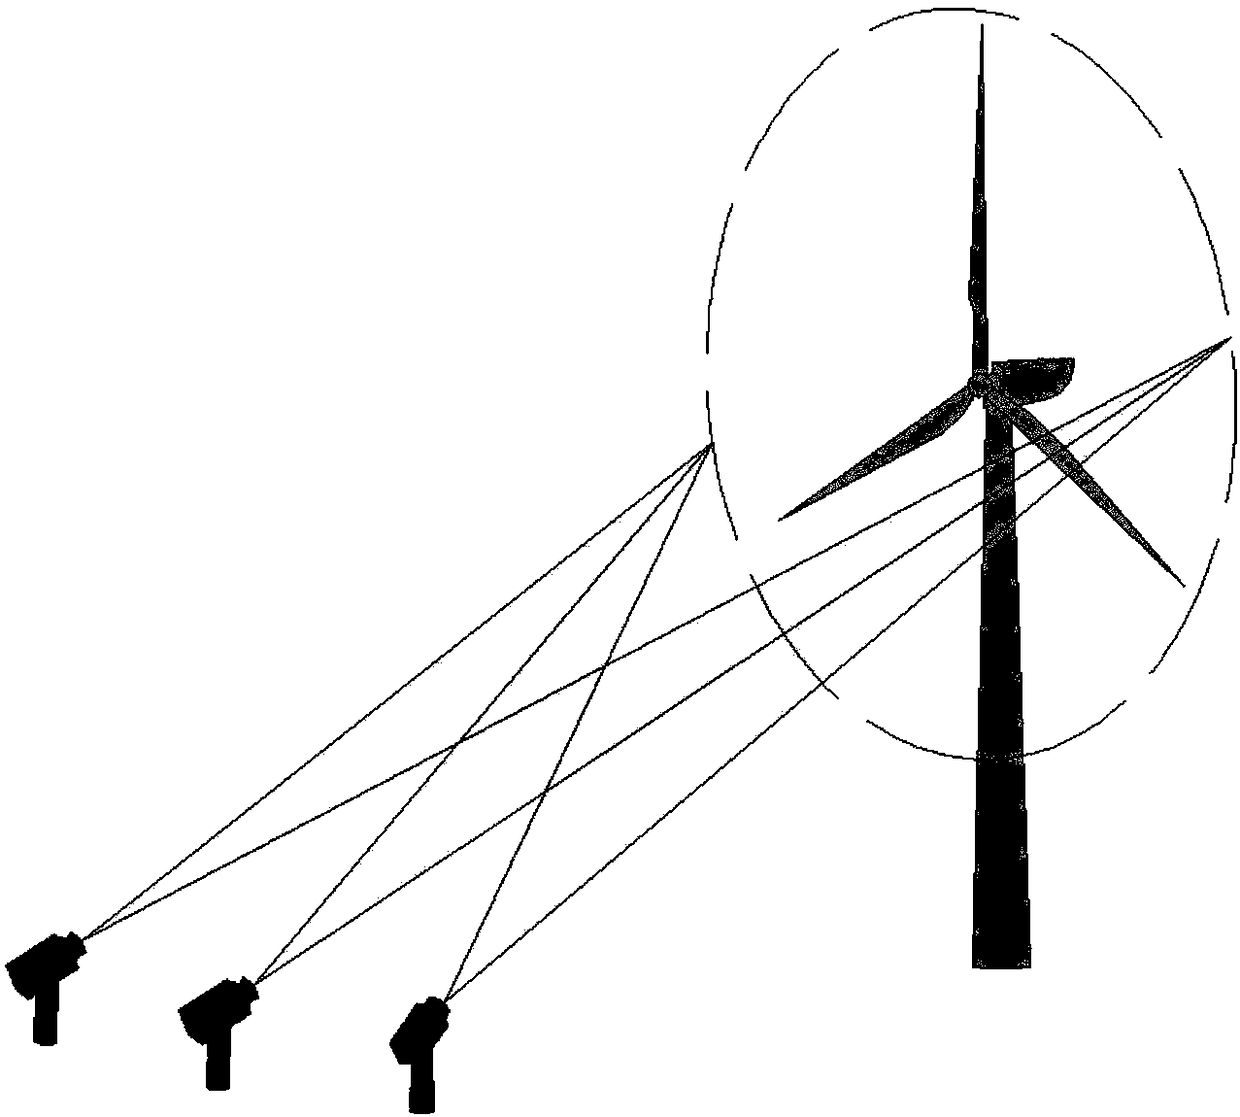 Video measurement method for large-scale wind power blade movement tracking